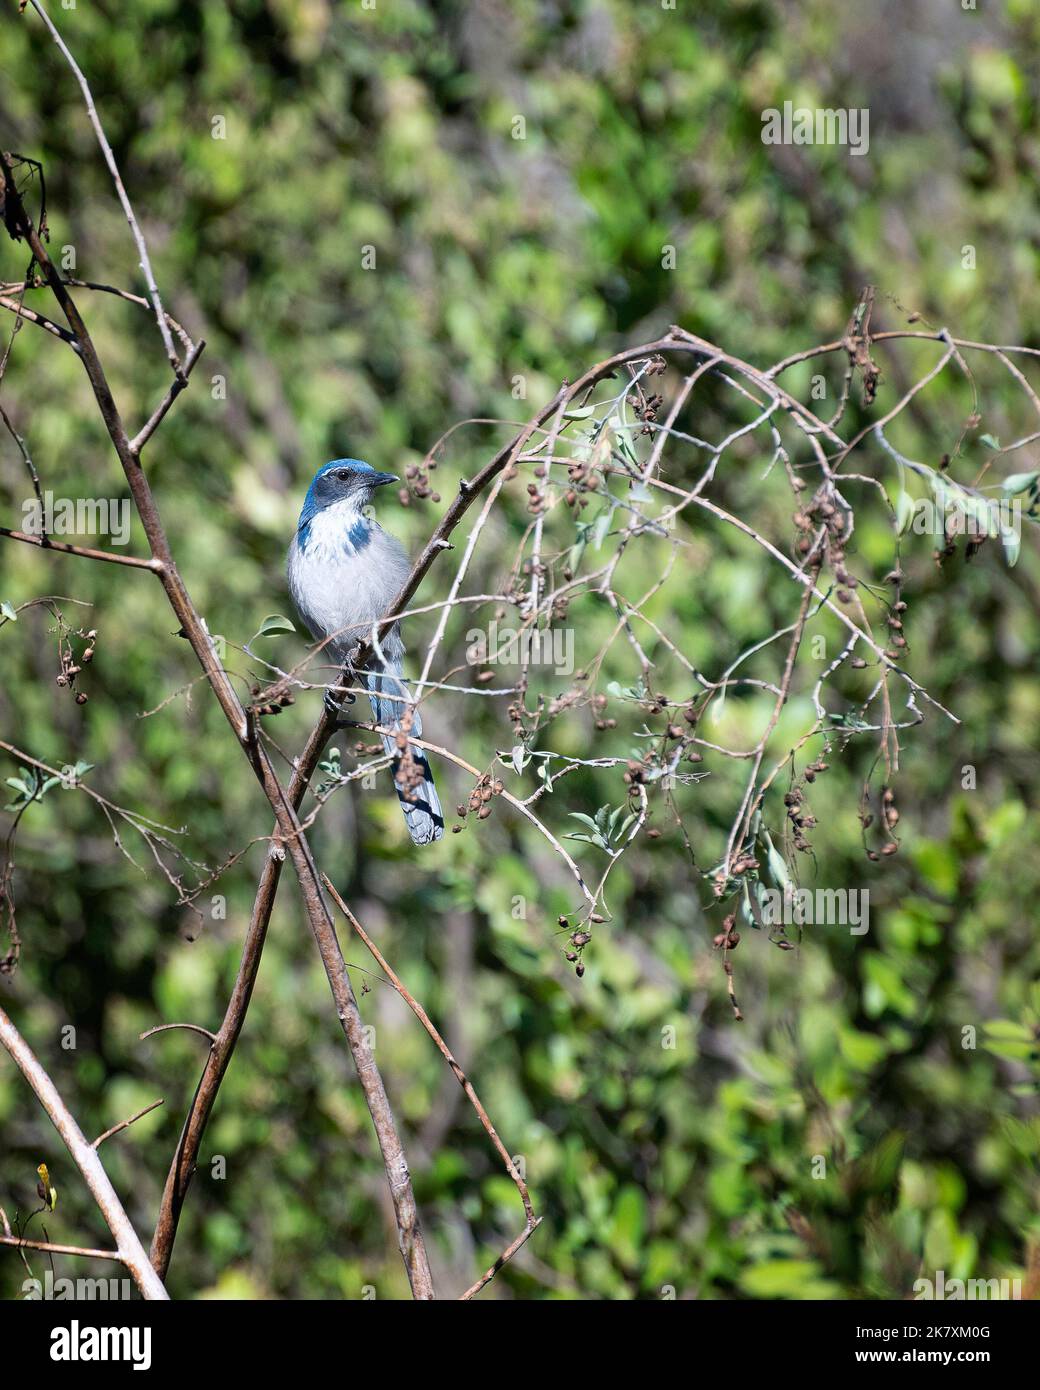 A California Scrub-Jay (Aphelocoma californica) perches in a shrub at Lake Hollywood in Los Angeles, CA. Stock Photo